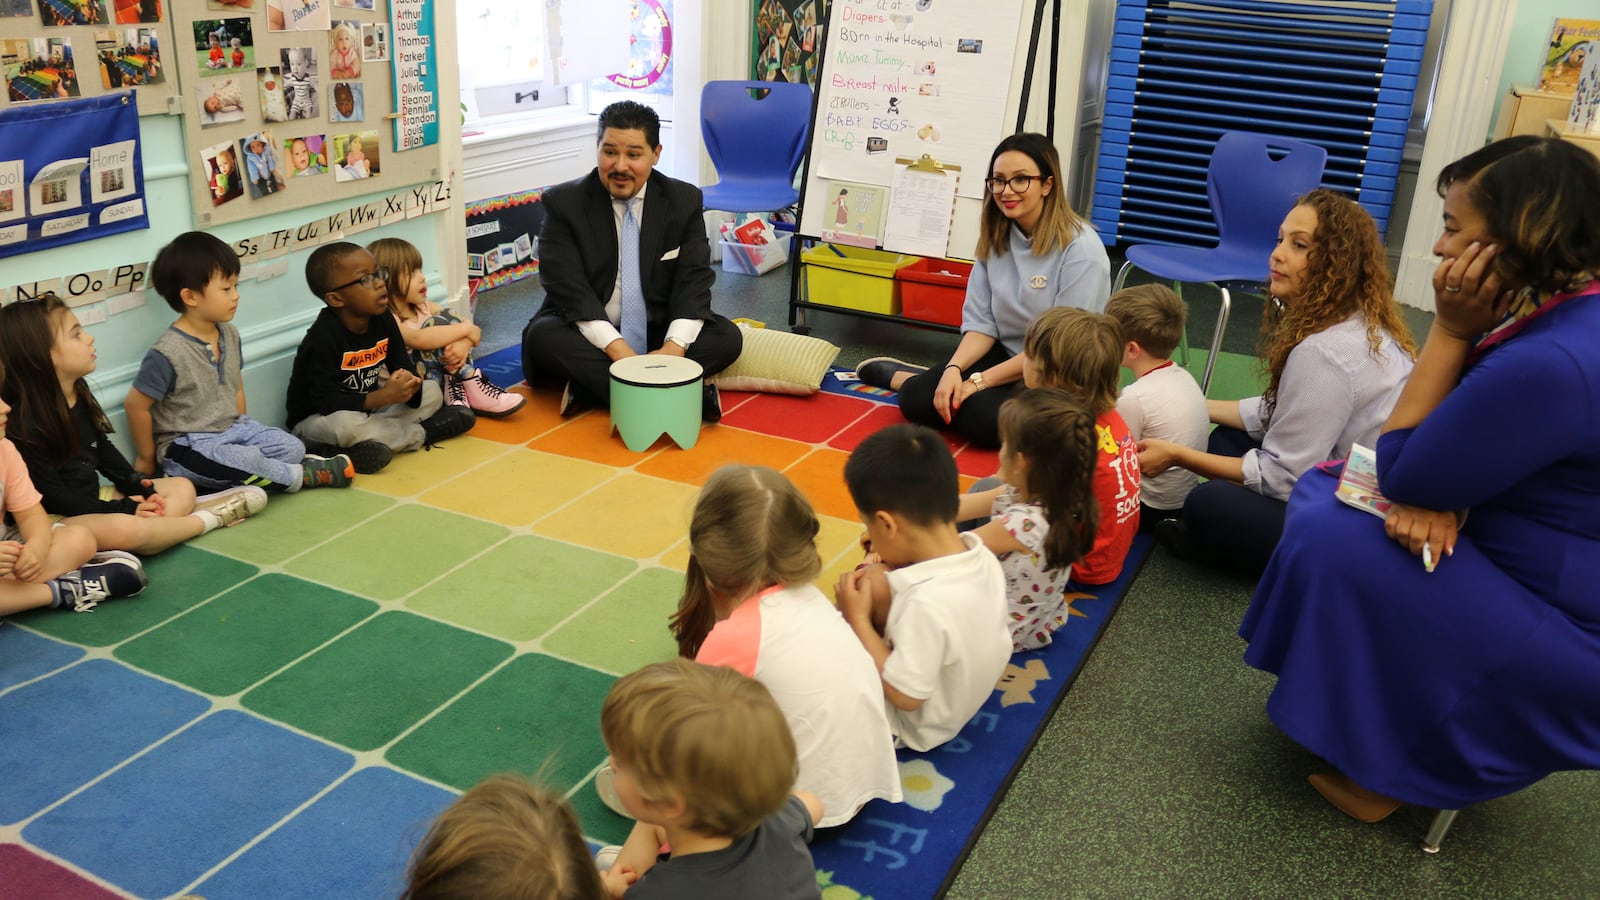 Schools Chancellor Richard Carranza visited a pre-K class inside the education department headquarters on May 9, 2018.